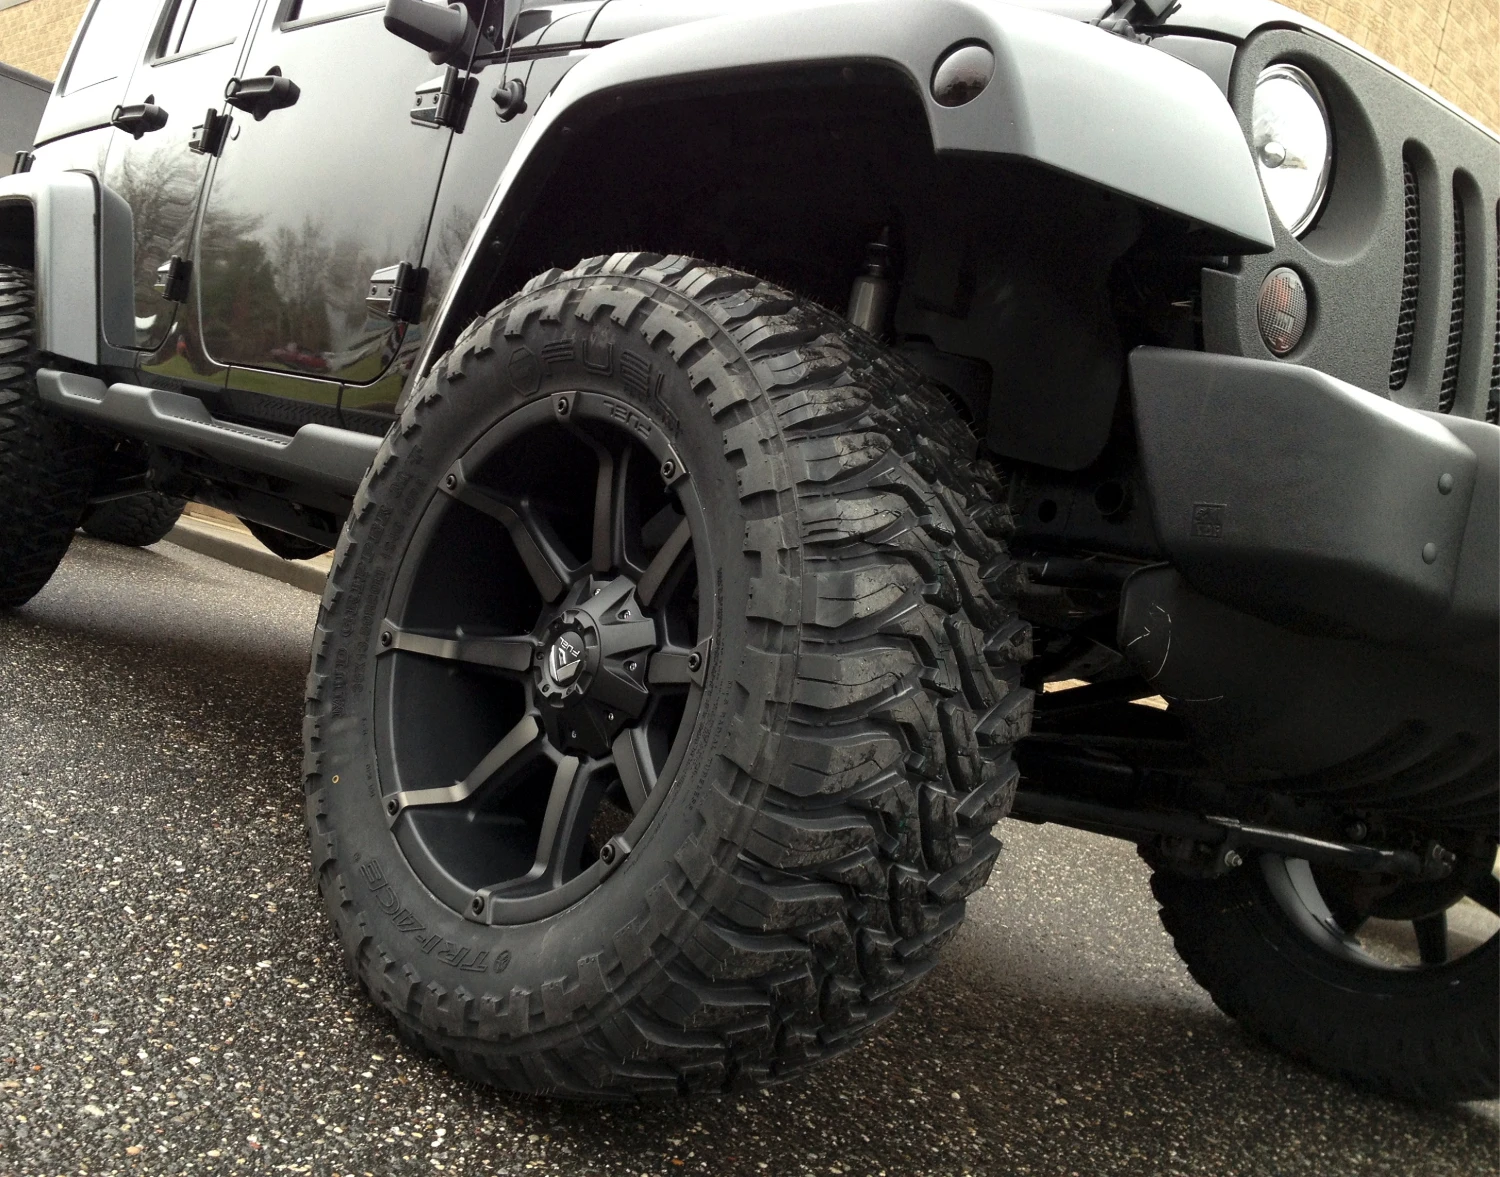 Jeep Wrangler lifted with Wheel Package by Autokicks